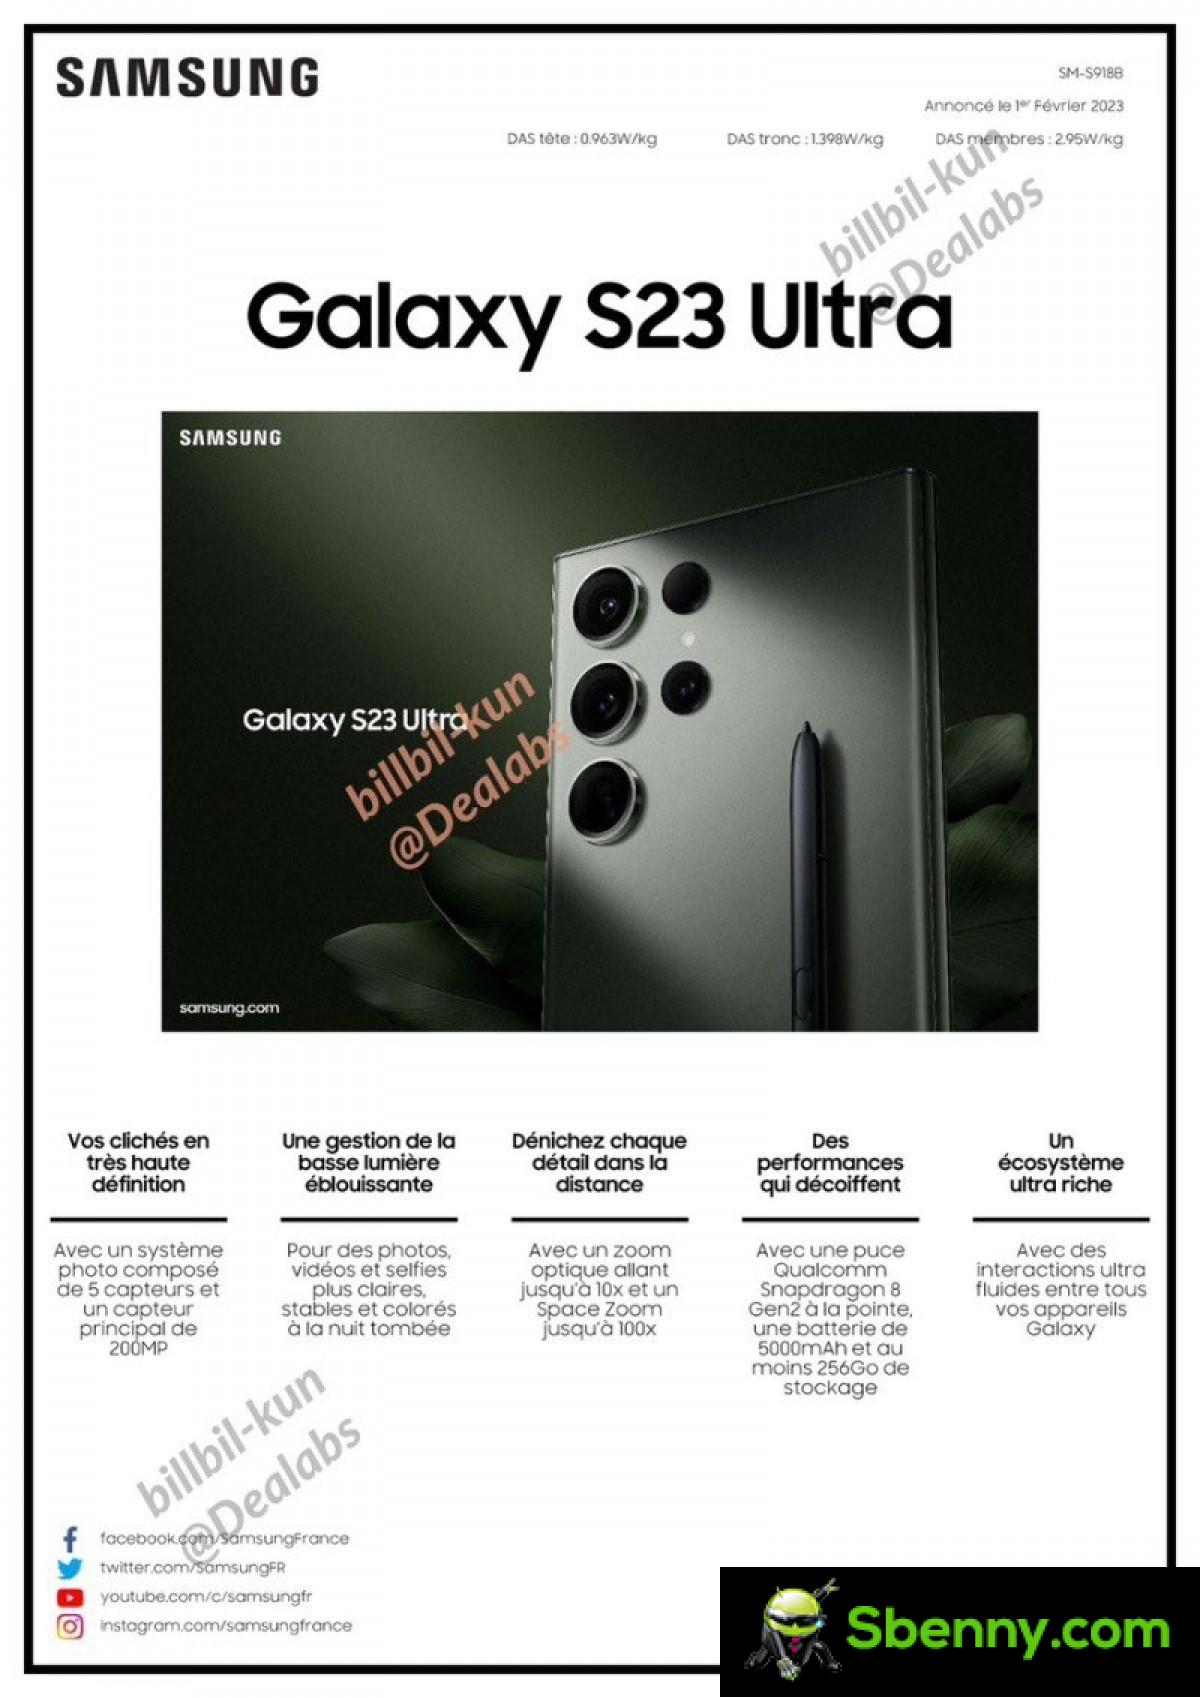 The technical sheet of the Samsung Galaxy S23 Ultra leaks in full